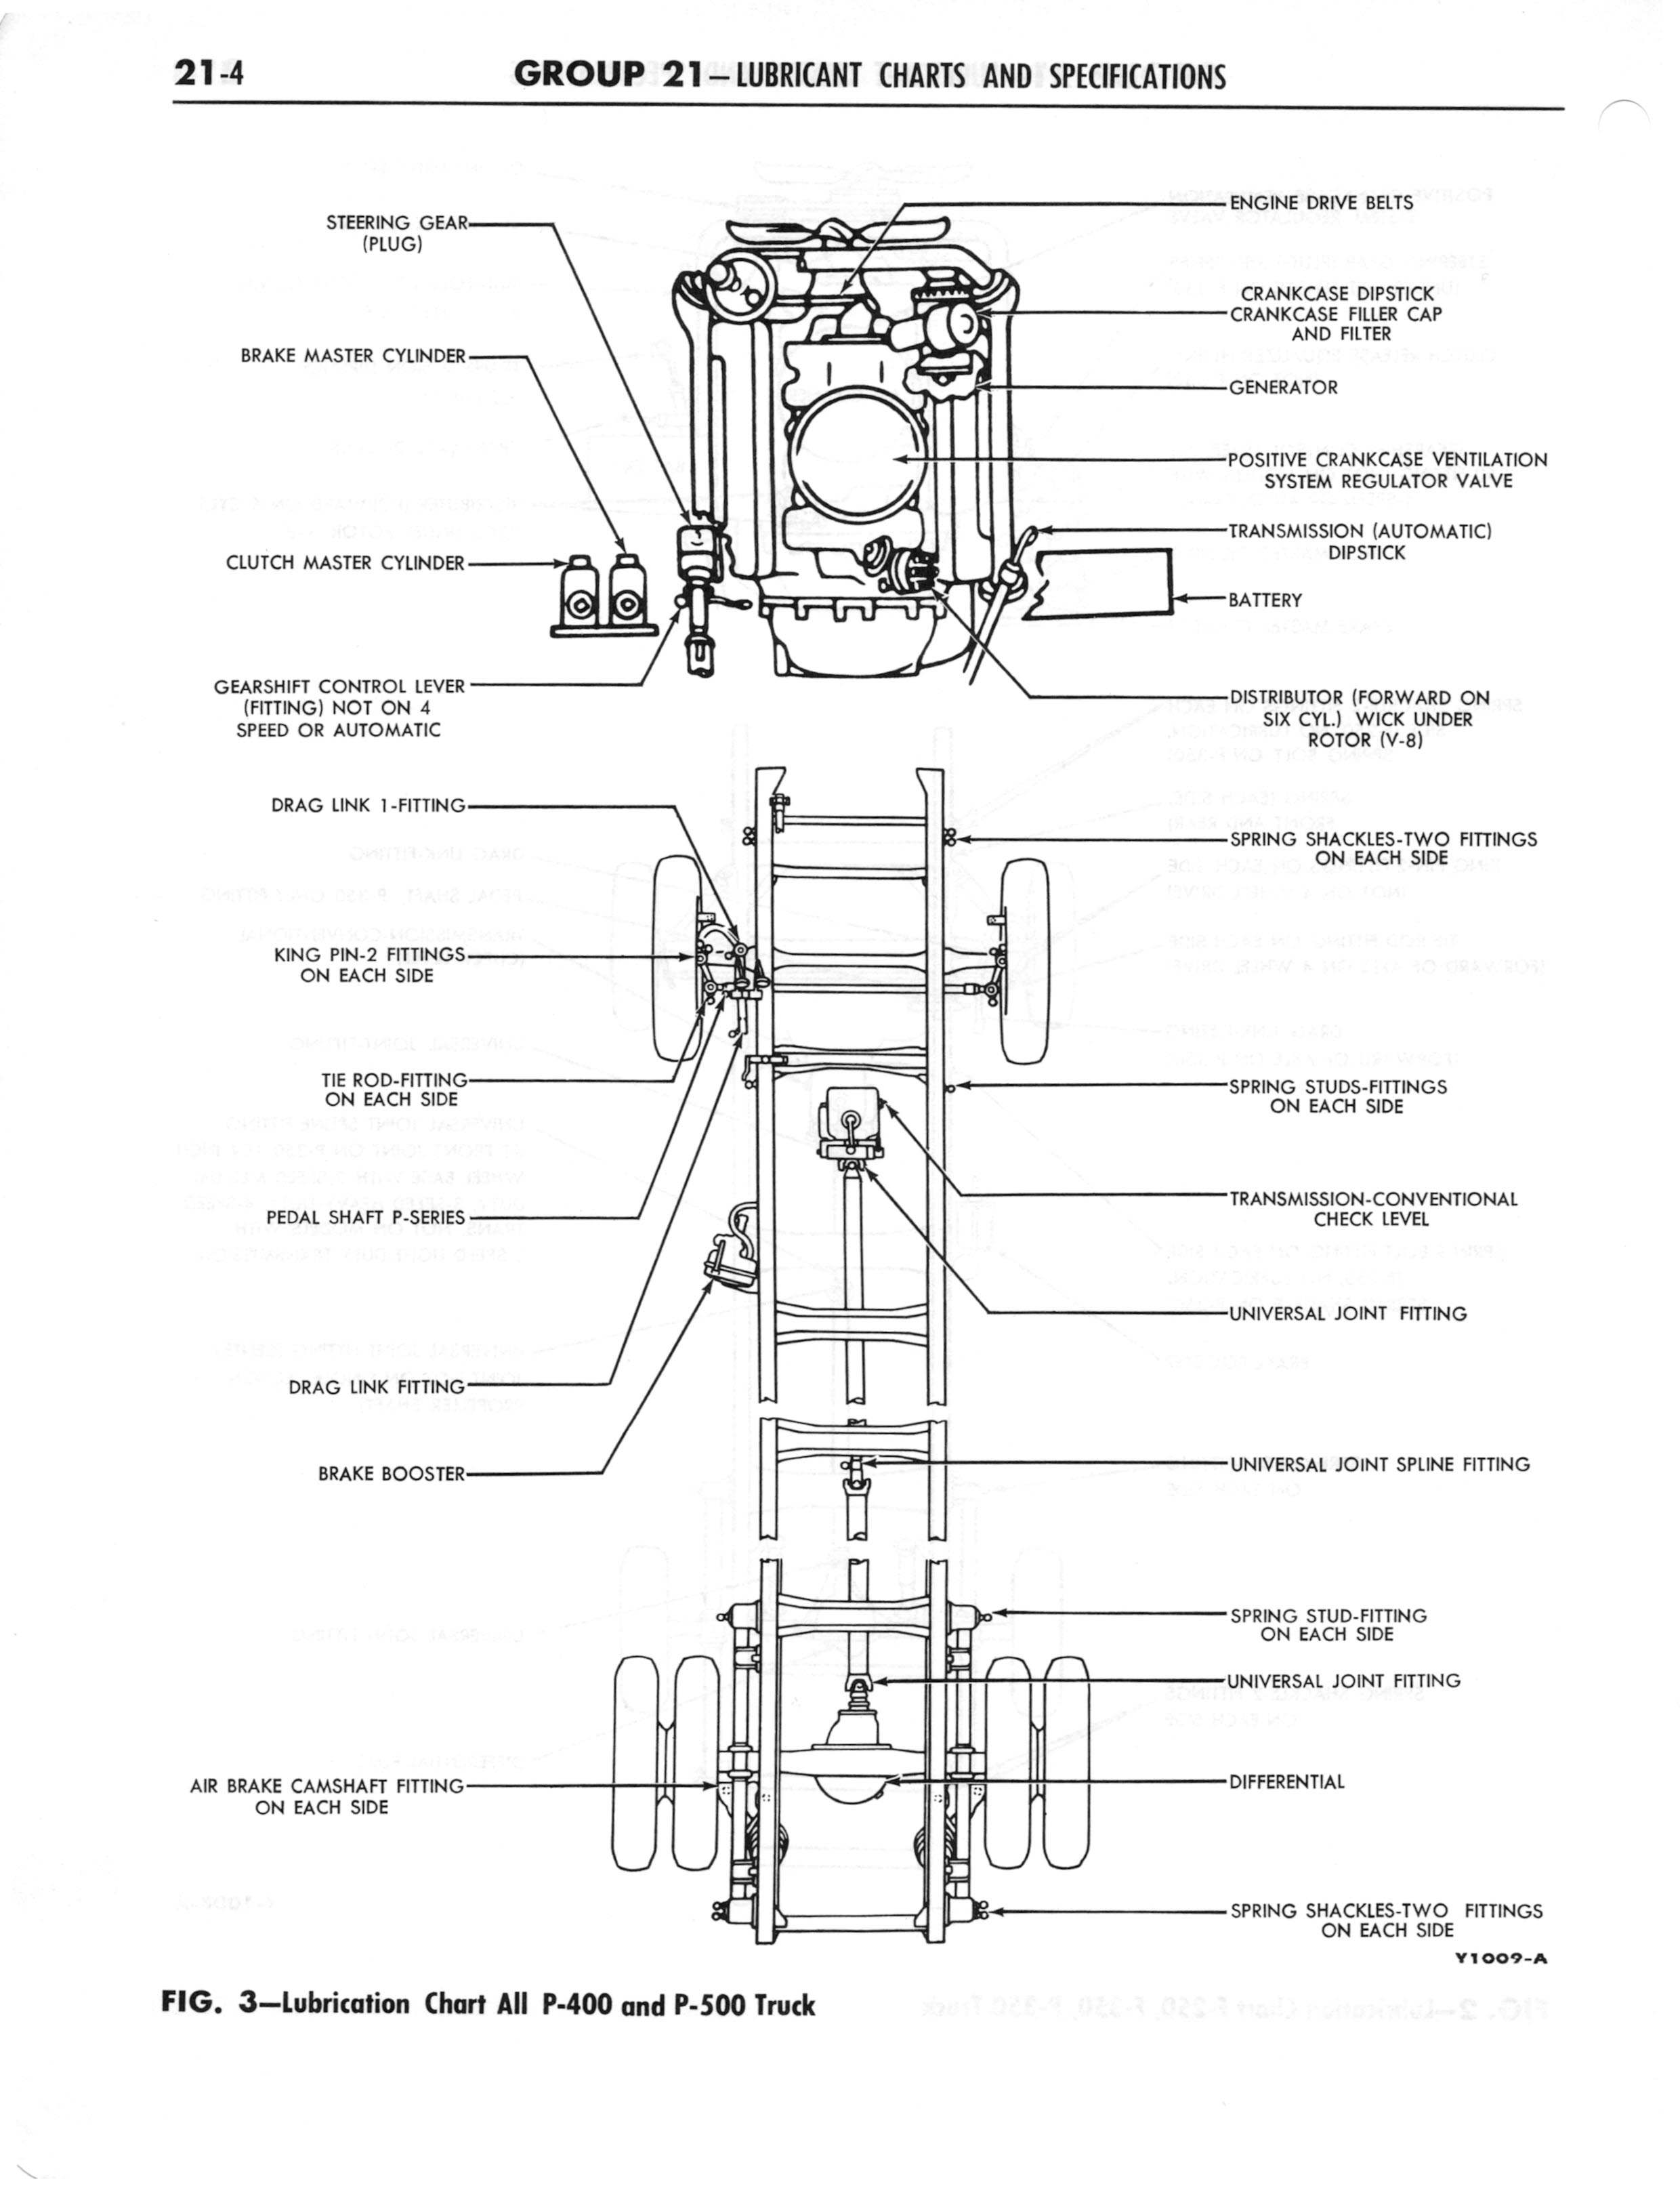 1964 Ford and Mercury Shop Manual Part 15 - Part 23 page 80 of 90